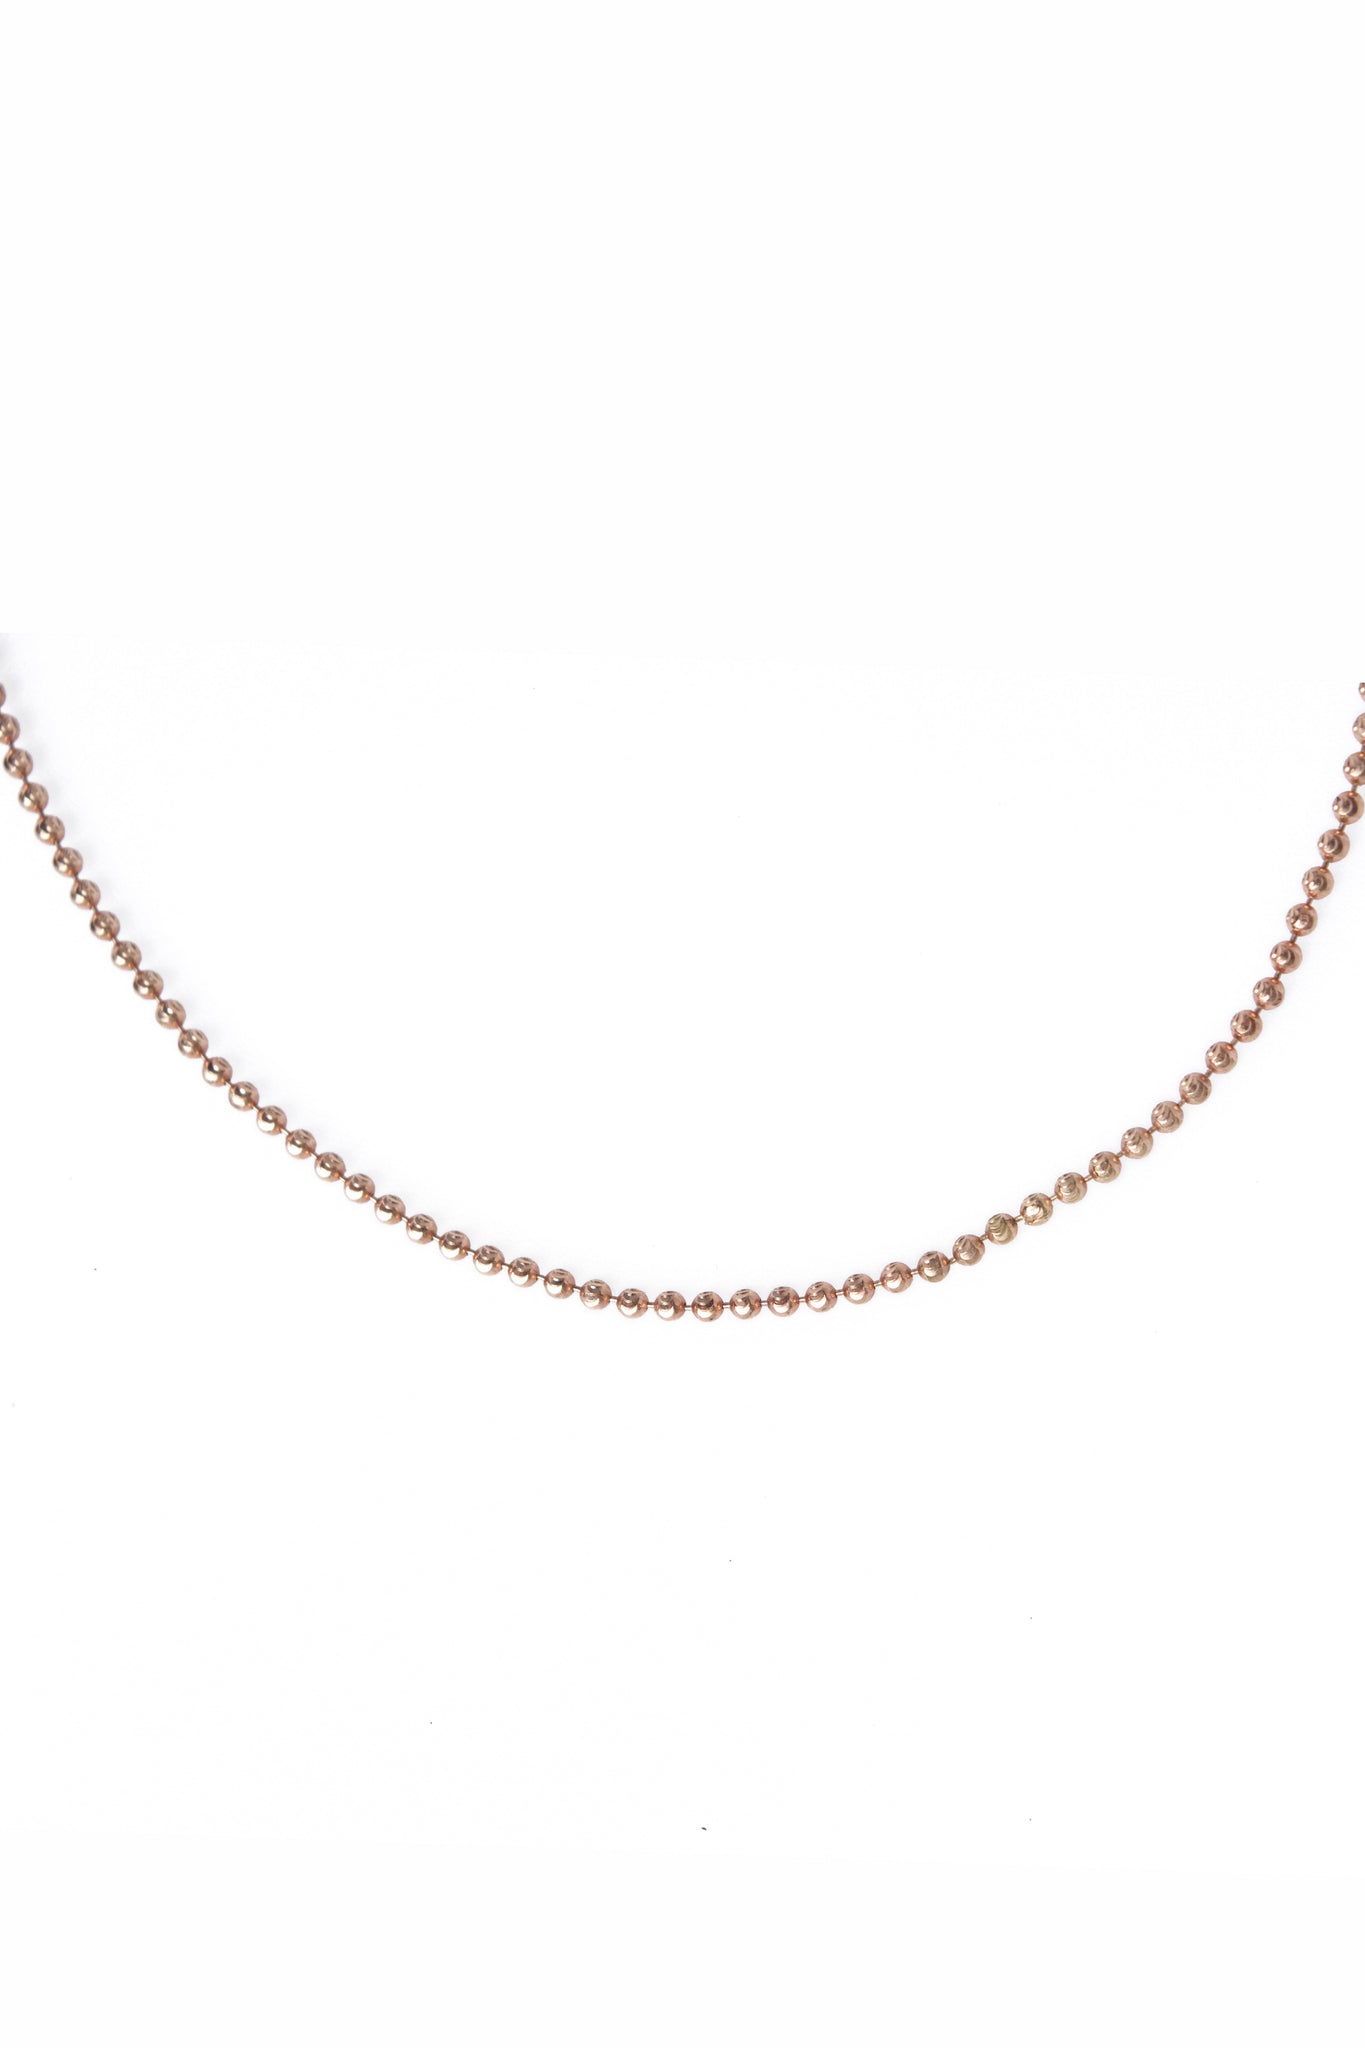 L.A. STEIN Faceted Diamond Cut Bead Chain Necklace in Rose Gold